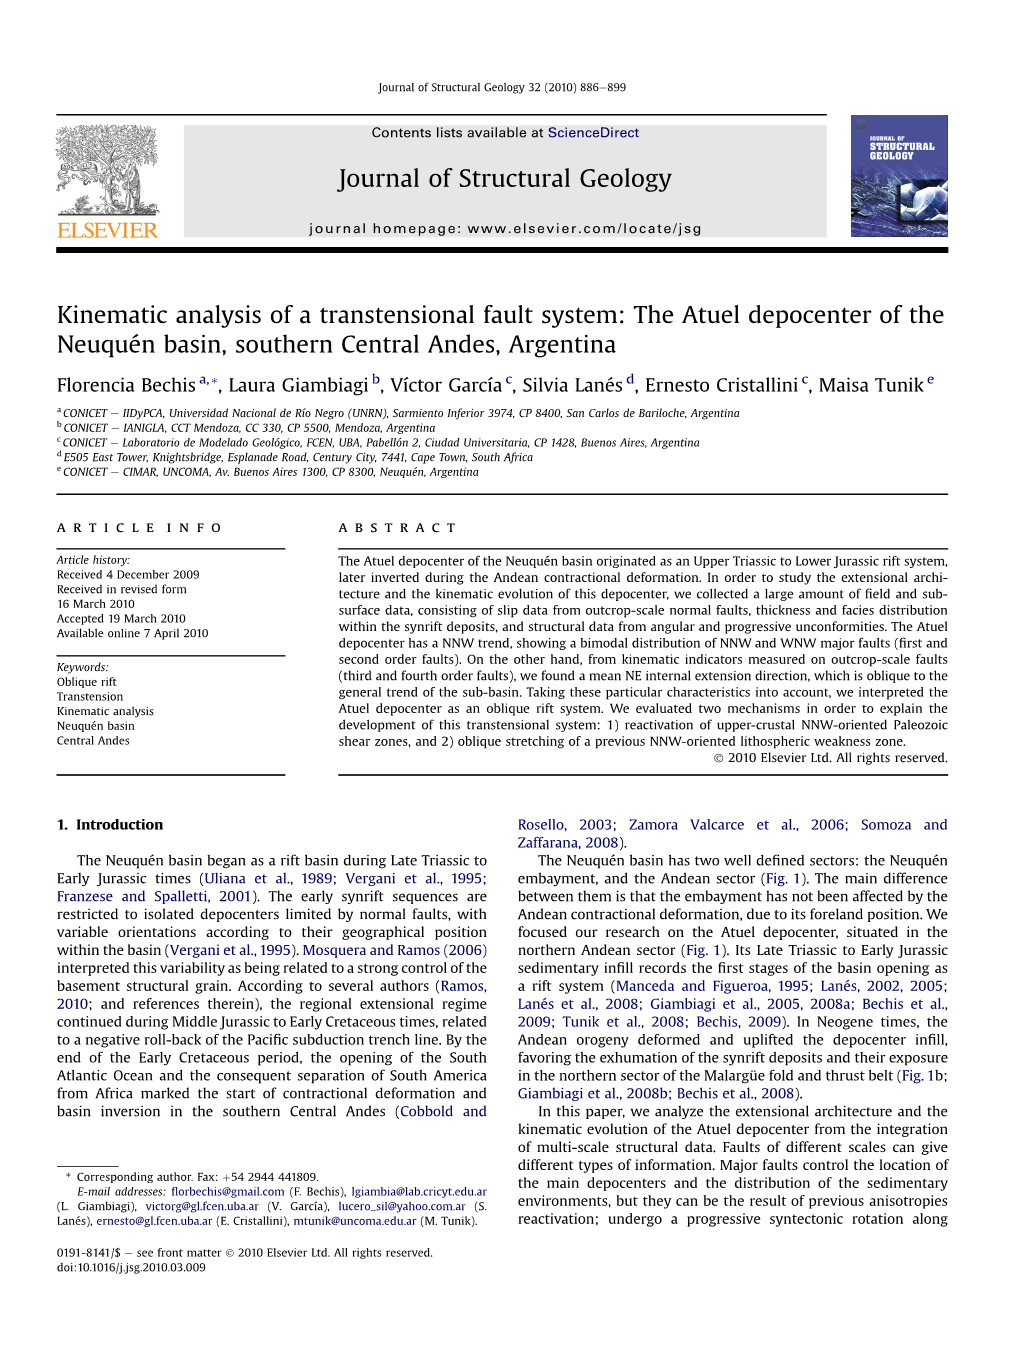 Kinematic Analysis of a Transtensional Fault System: the Atuel Depocenter of the Neuquen Basin, Southern Central Andes, Argentin